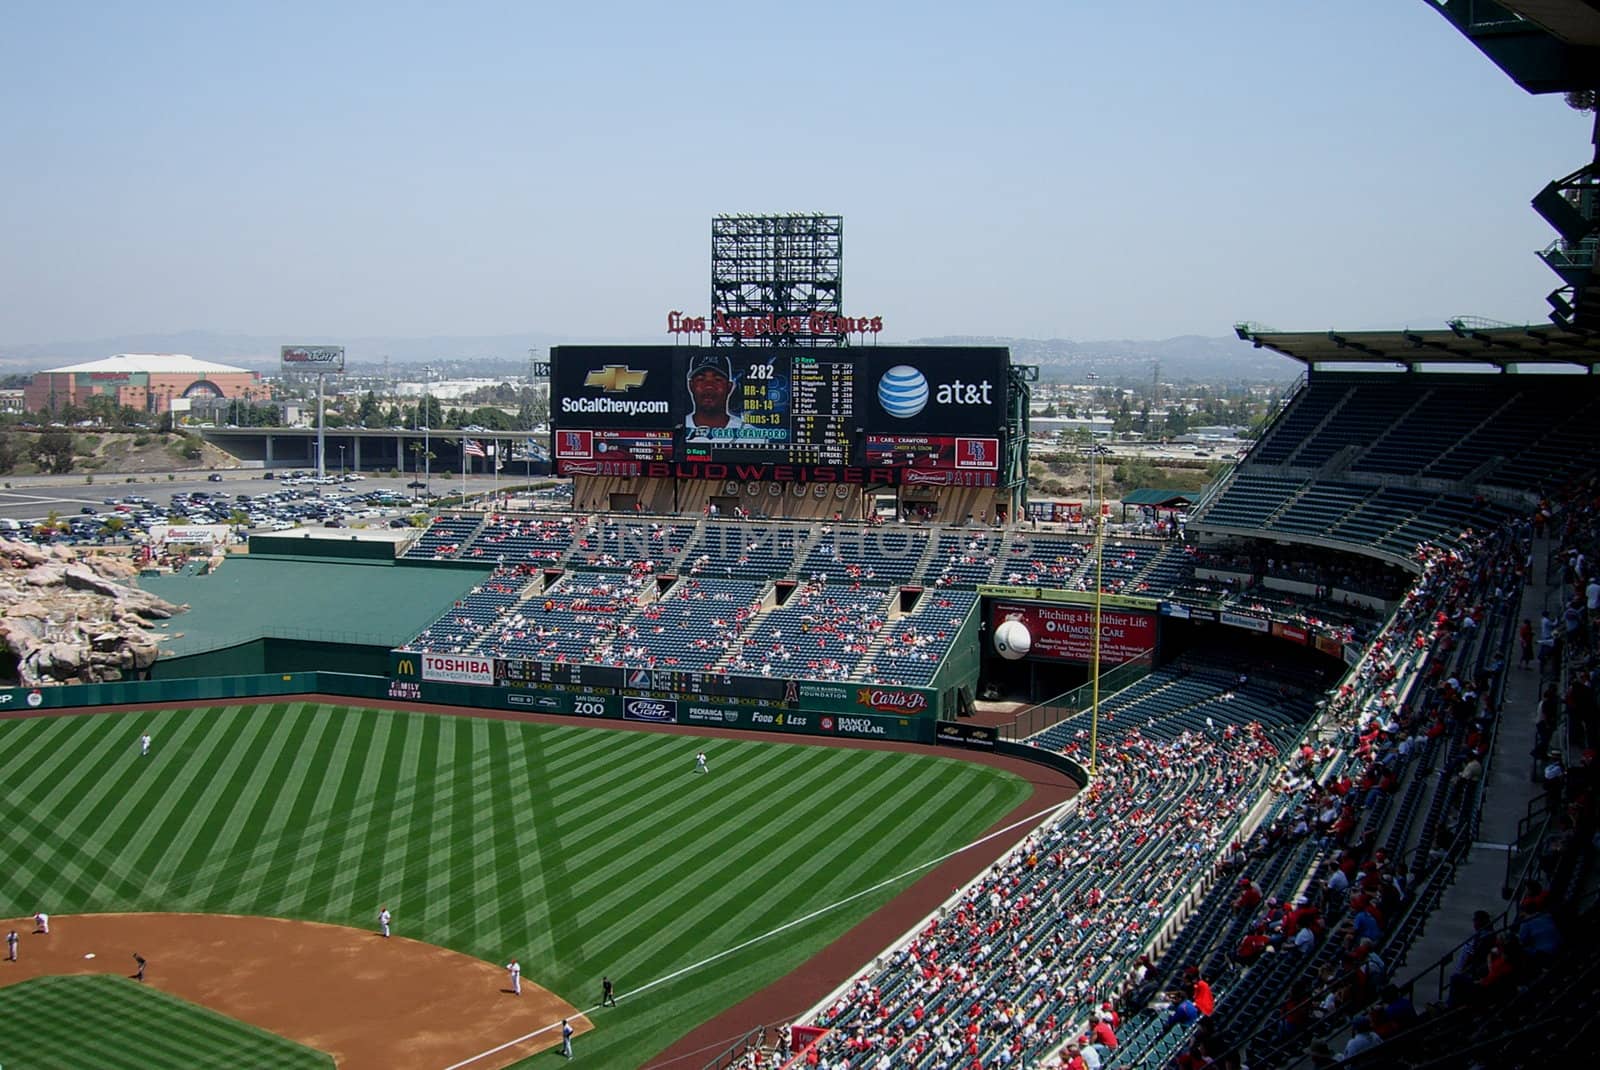 Angel Stadium of Anaheim - Los Angeles by Ffooter